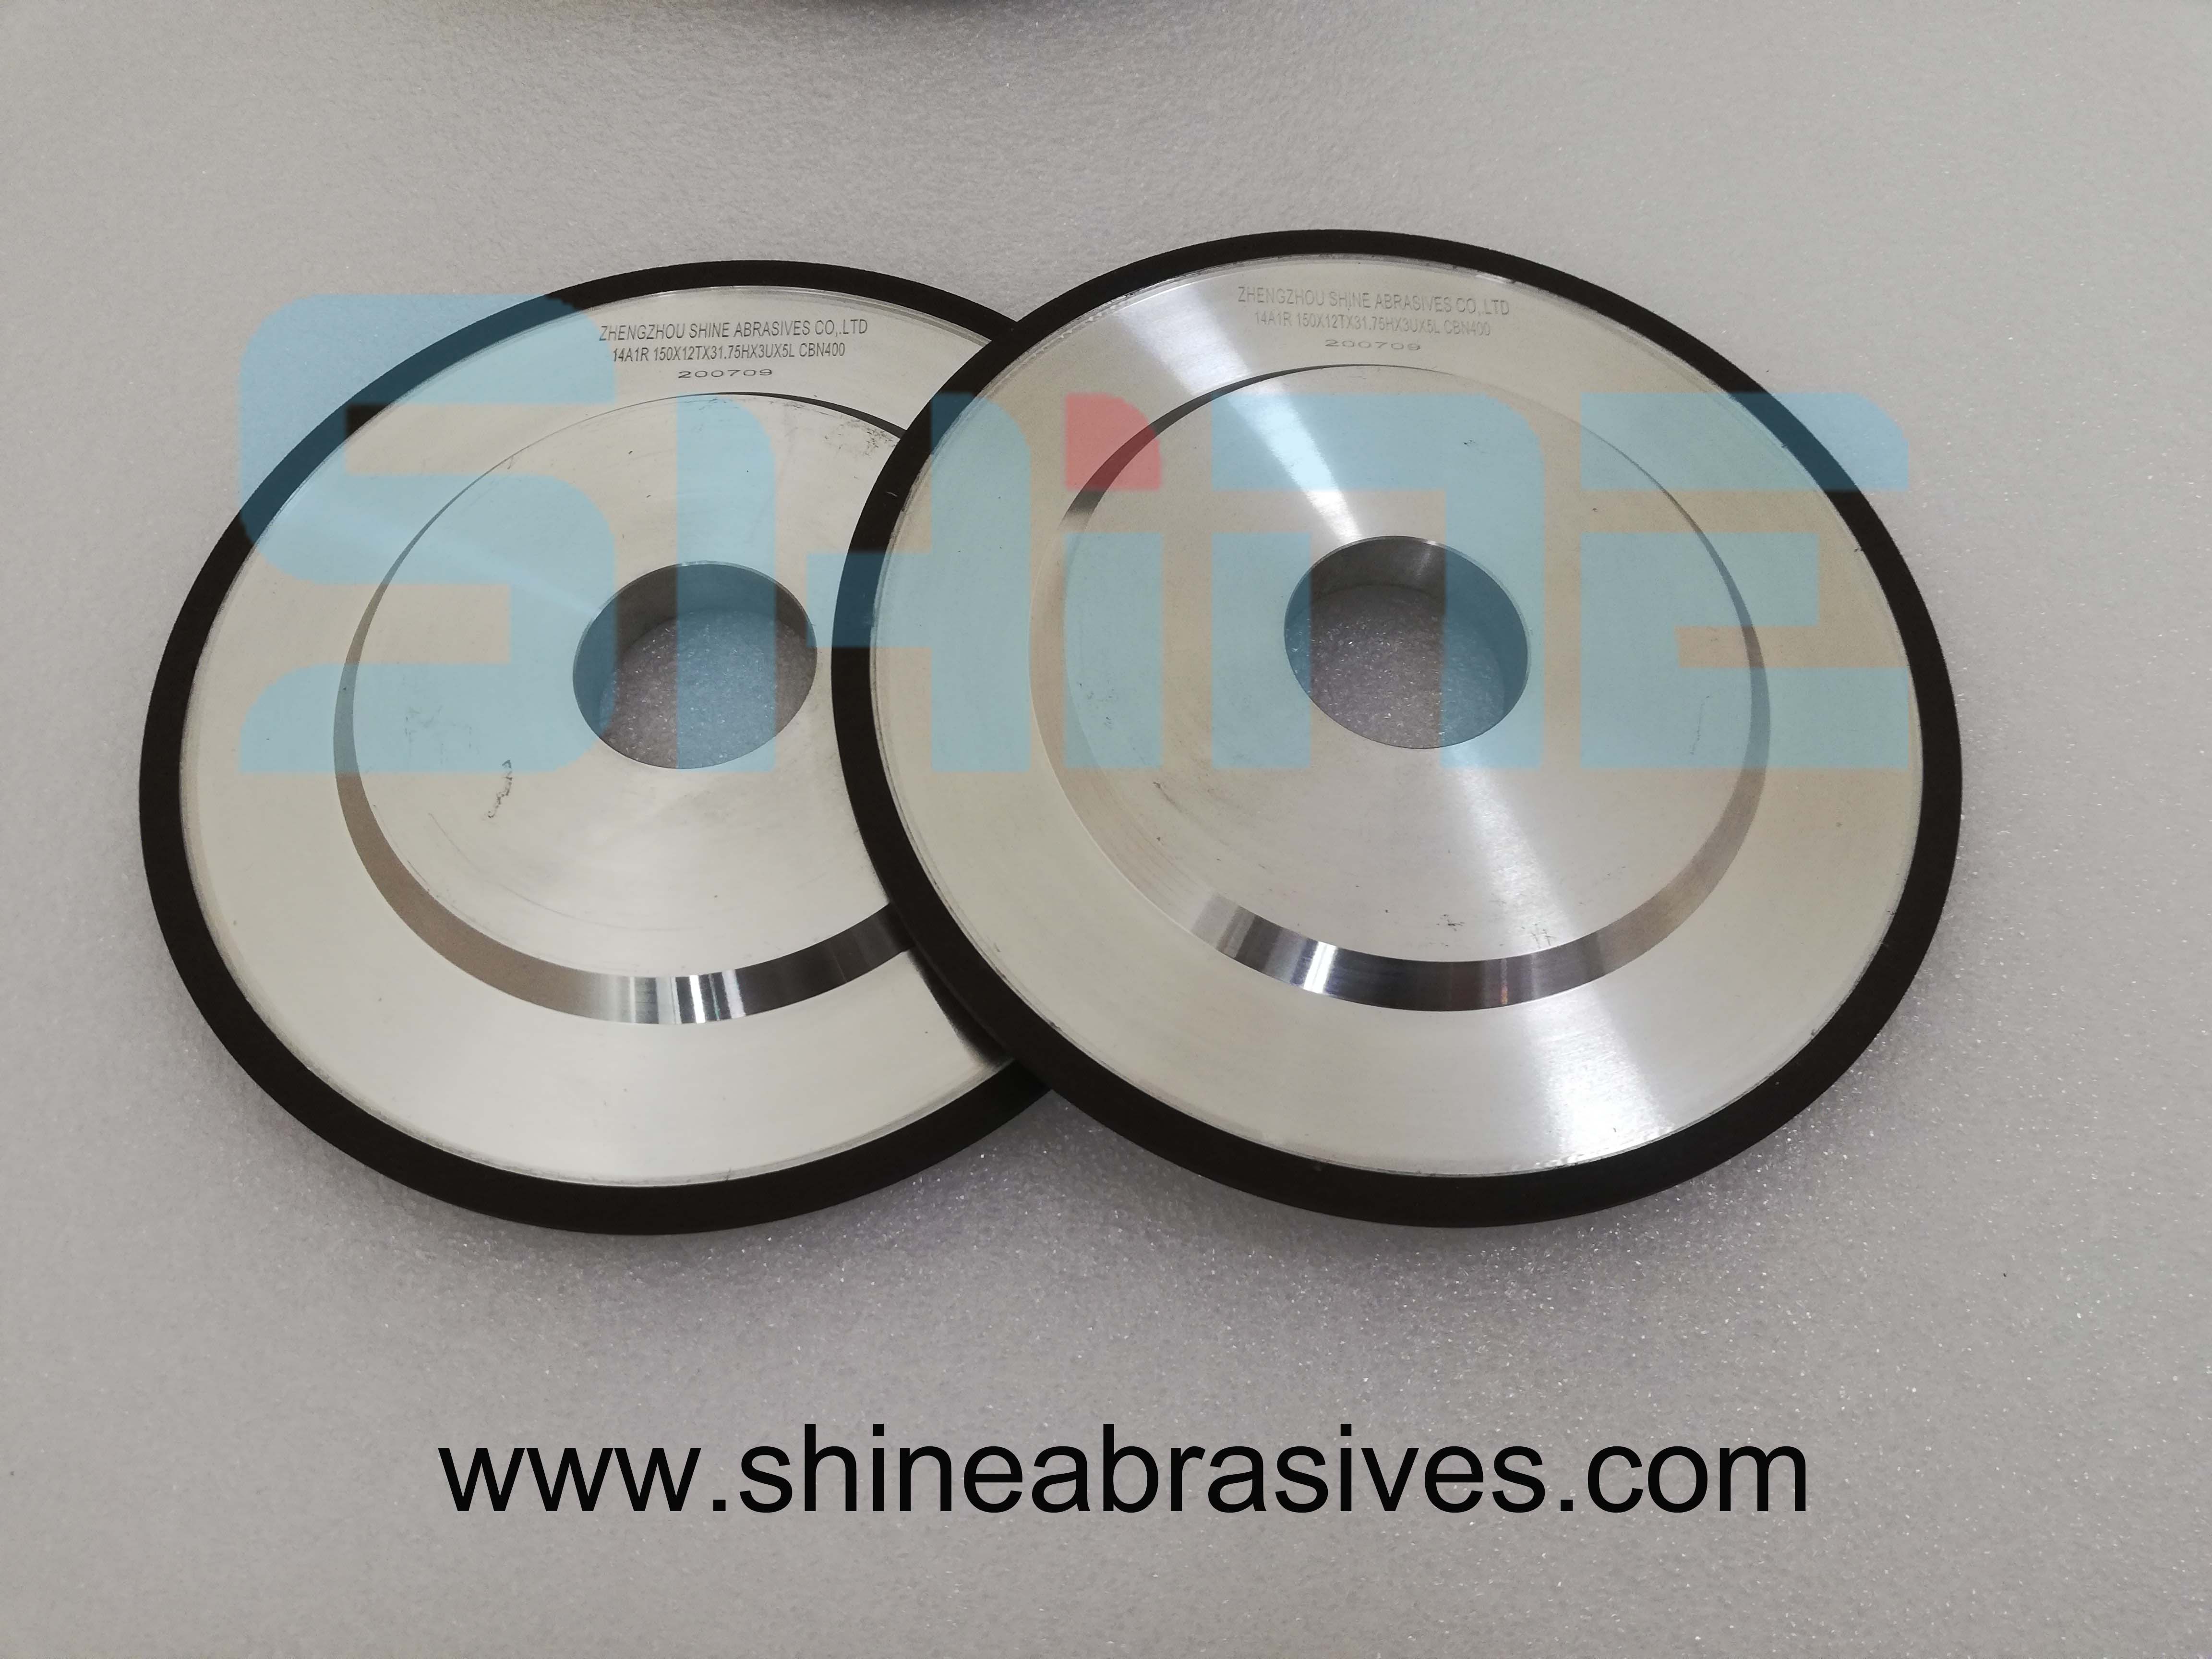 14A1 Resin Diamond and CBN grinding wheels